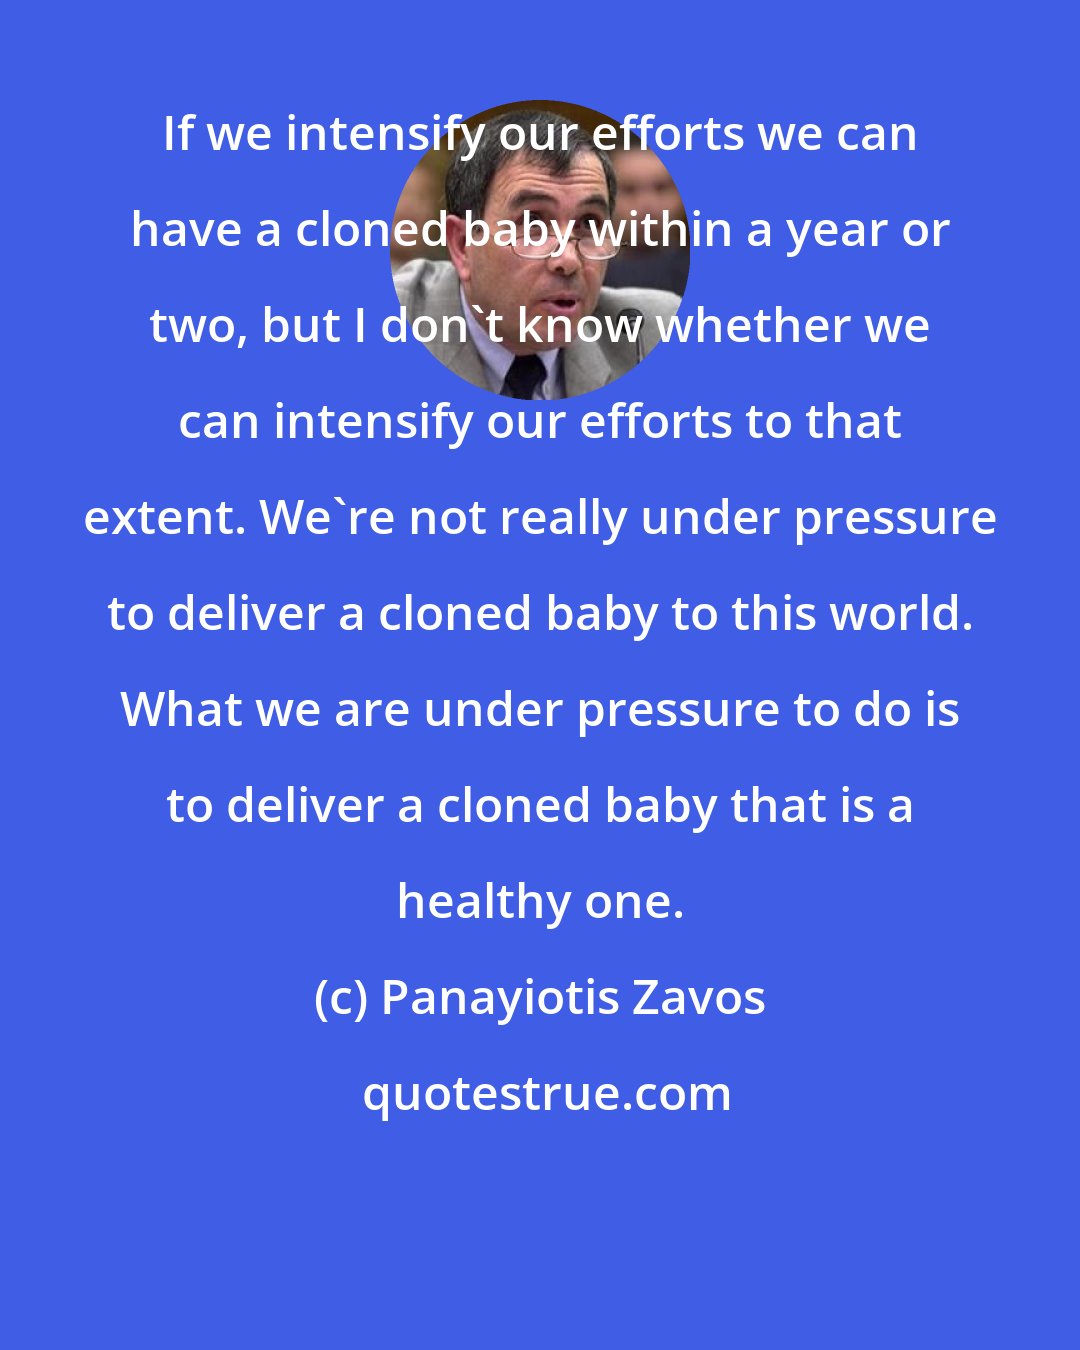 Panayiotis Zavos: If we intensify our efforts we can have a cloned baby within a year or two, but I don't know whether we can intensify our efforts to that extent. We're not really under pressure to deliver a cloned baby to this world. What we are under pressure to do is to deliver a cloned baby that is a healthy one.